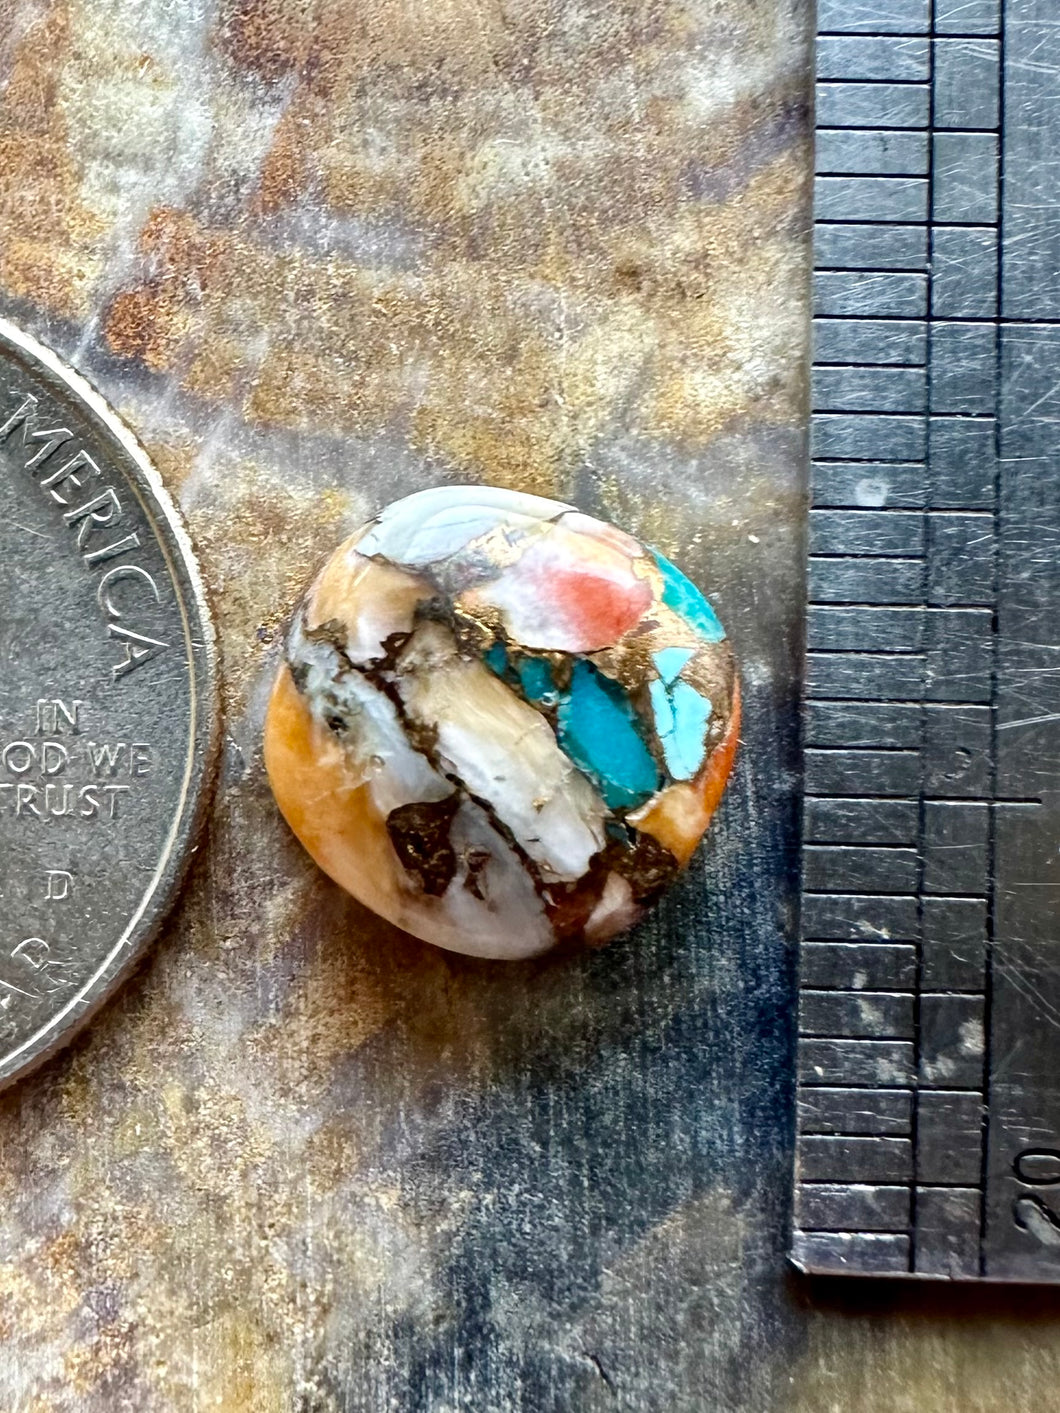 Spiny Oyster, Turquoise and Bronze Matrix Composite Cabochon